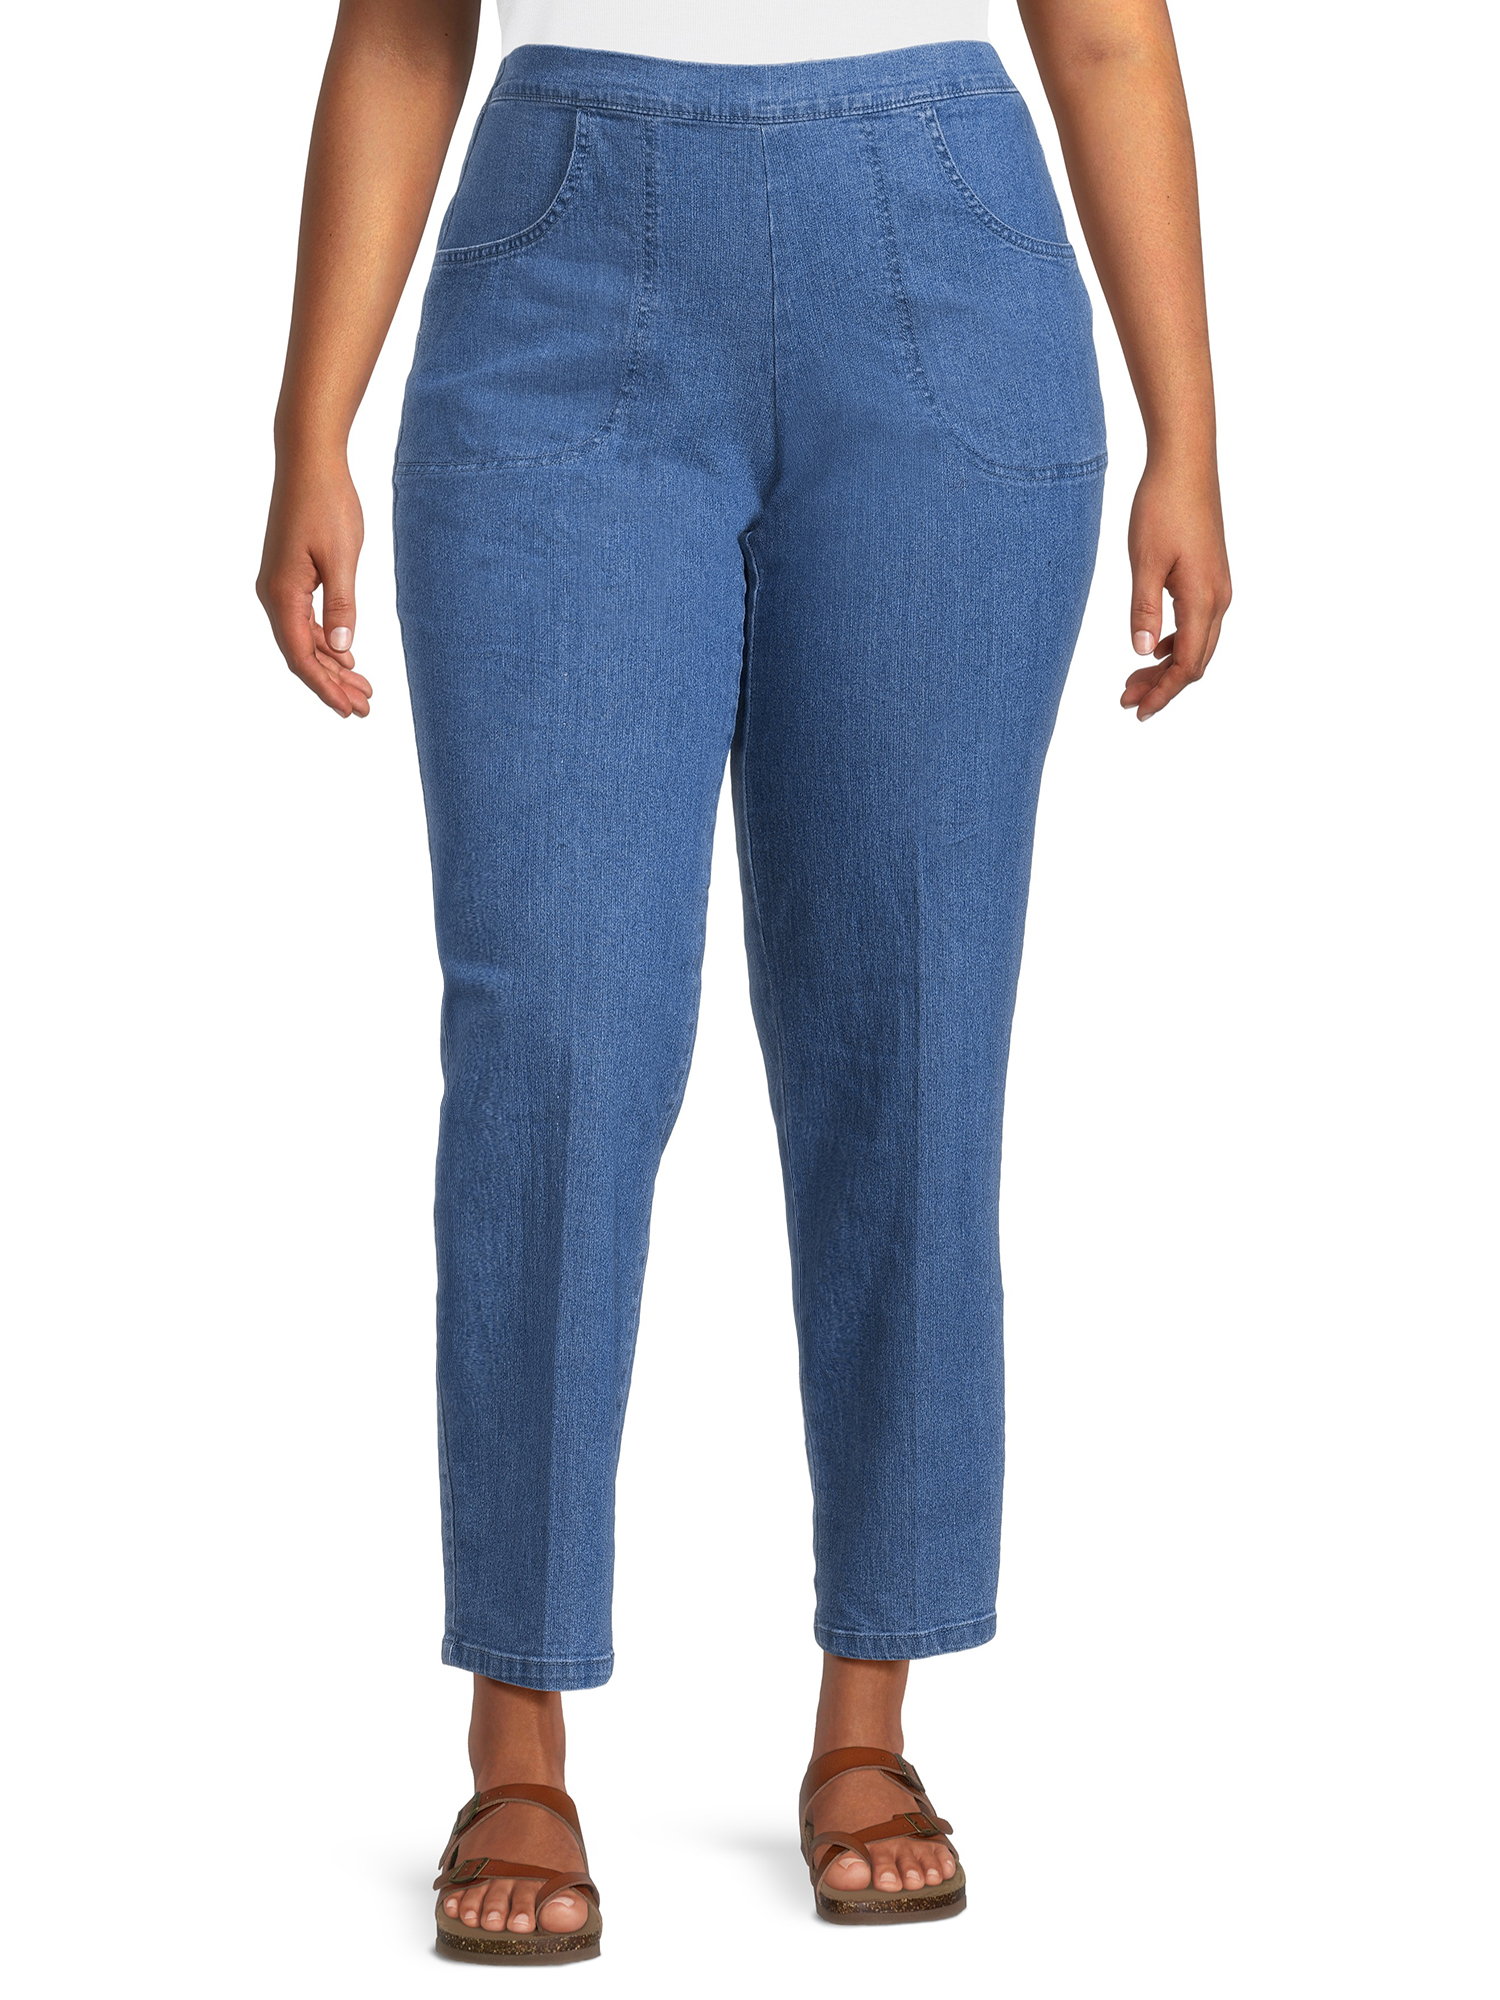 Just My Size Women's Plus Size 2 Pocket Pull On Pant, 2-Pack - image 5 of 6